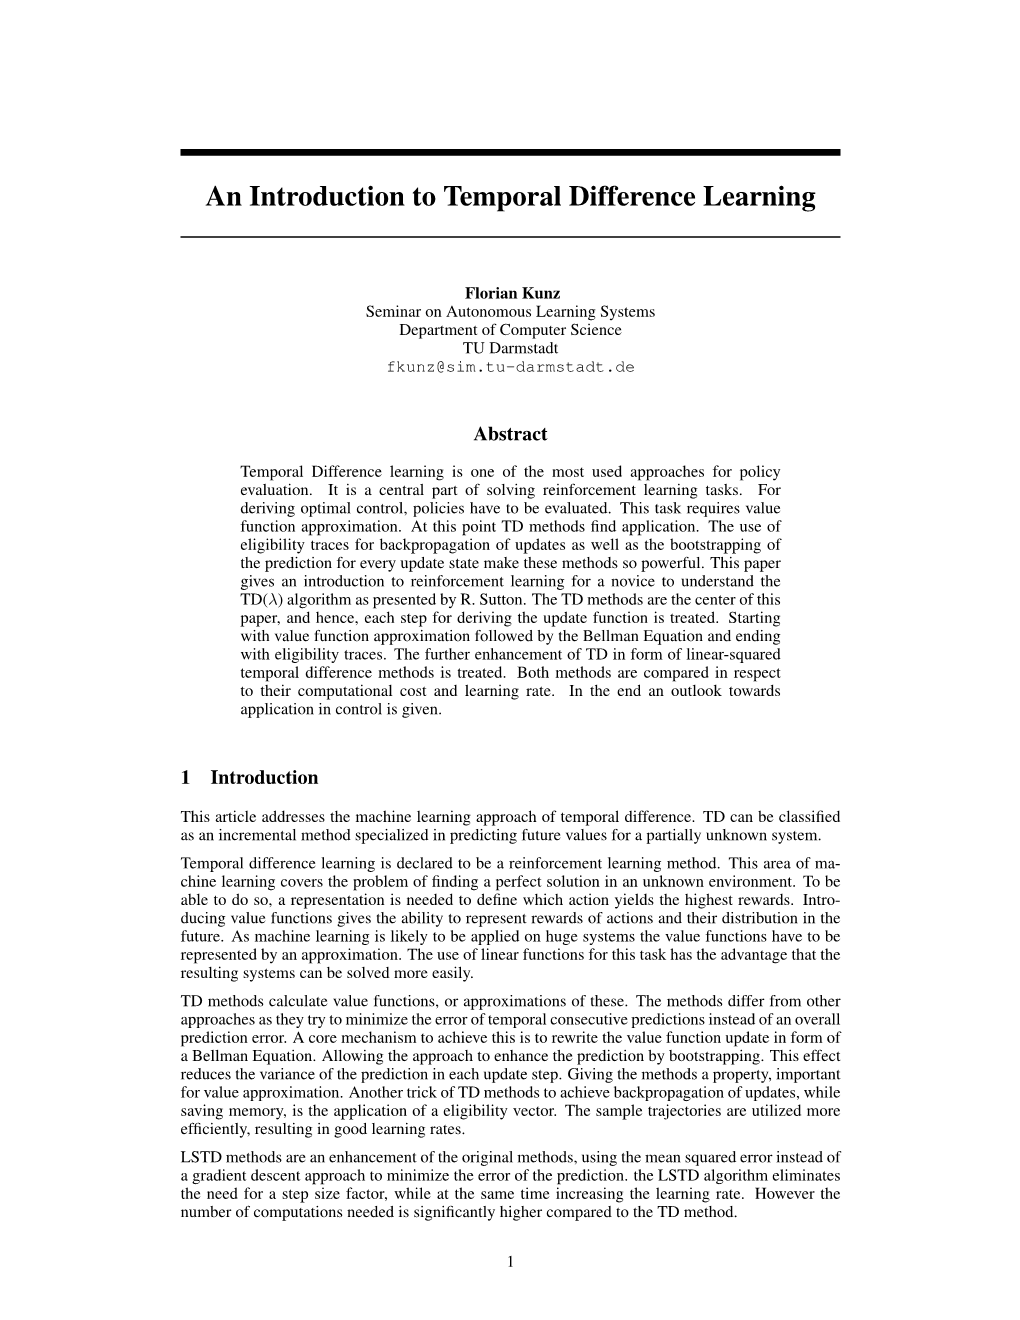 An Introduction to Temporal Difference Learning